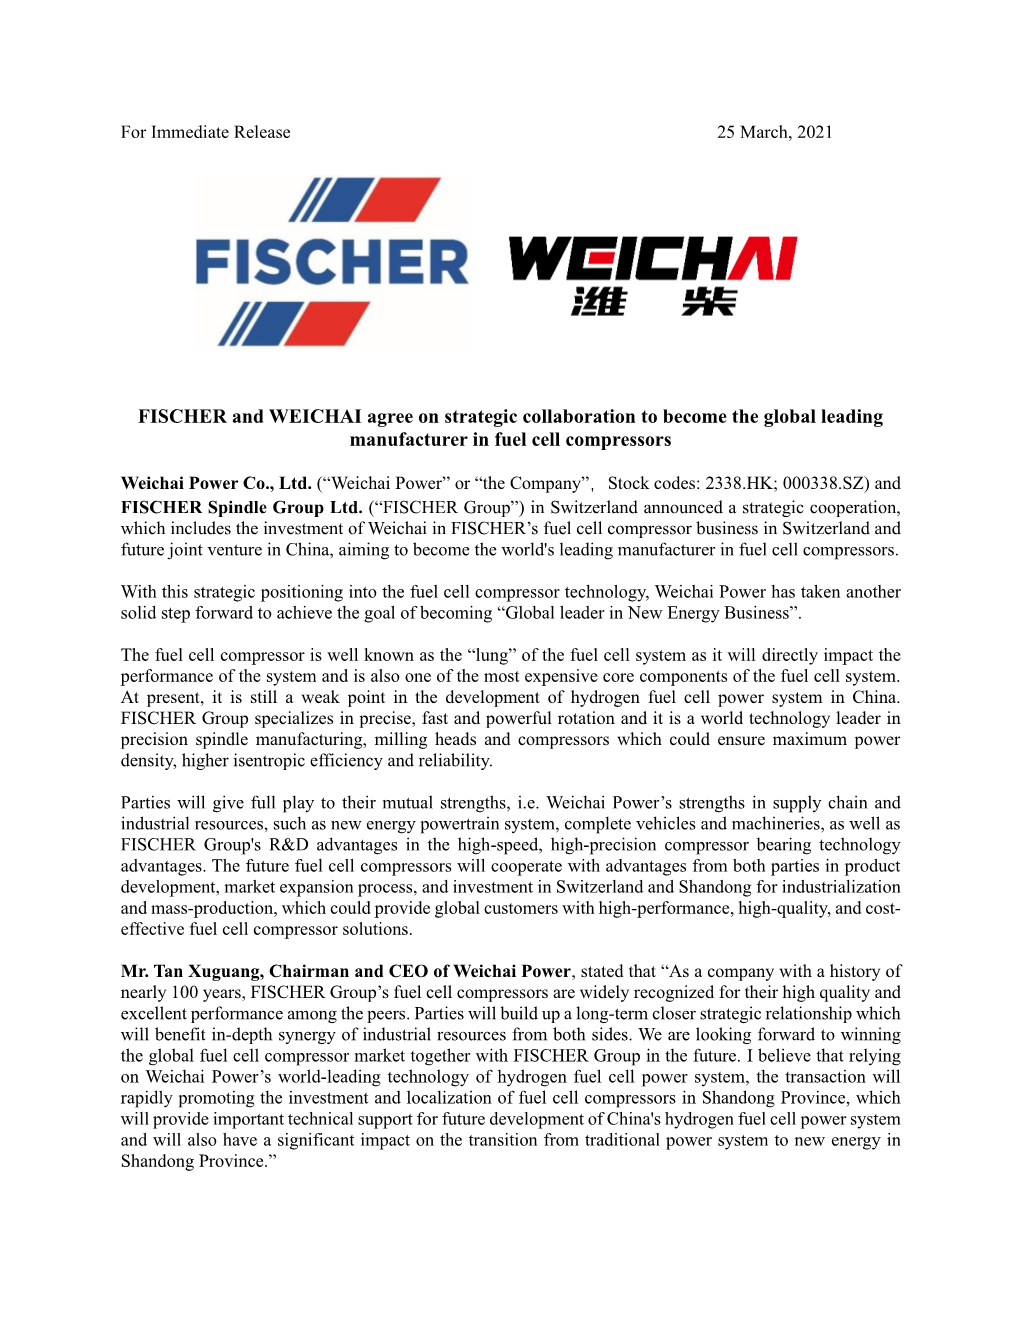 FISCHER and WEICHAI Agree on Strategic Collaboration to Become the Global Leading Manufacturer in Fuel Cell Compressors